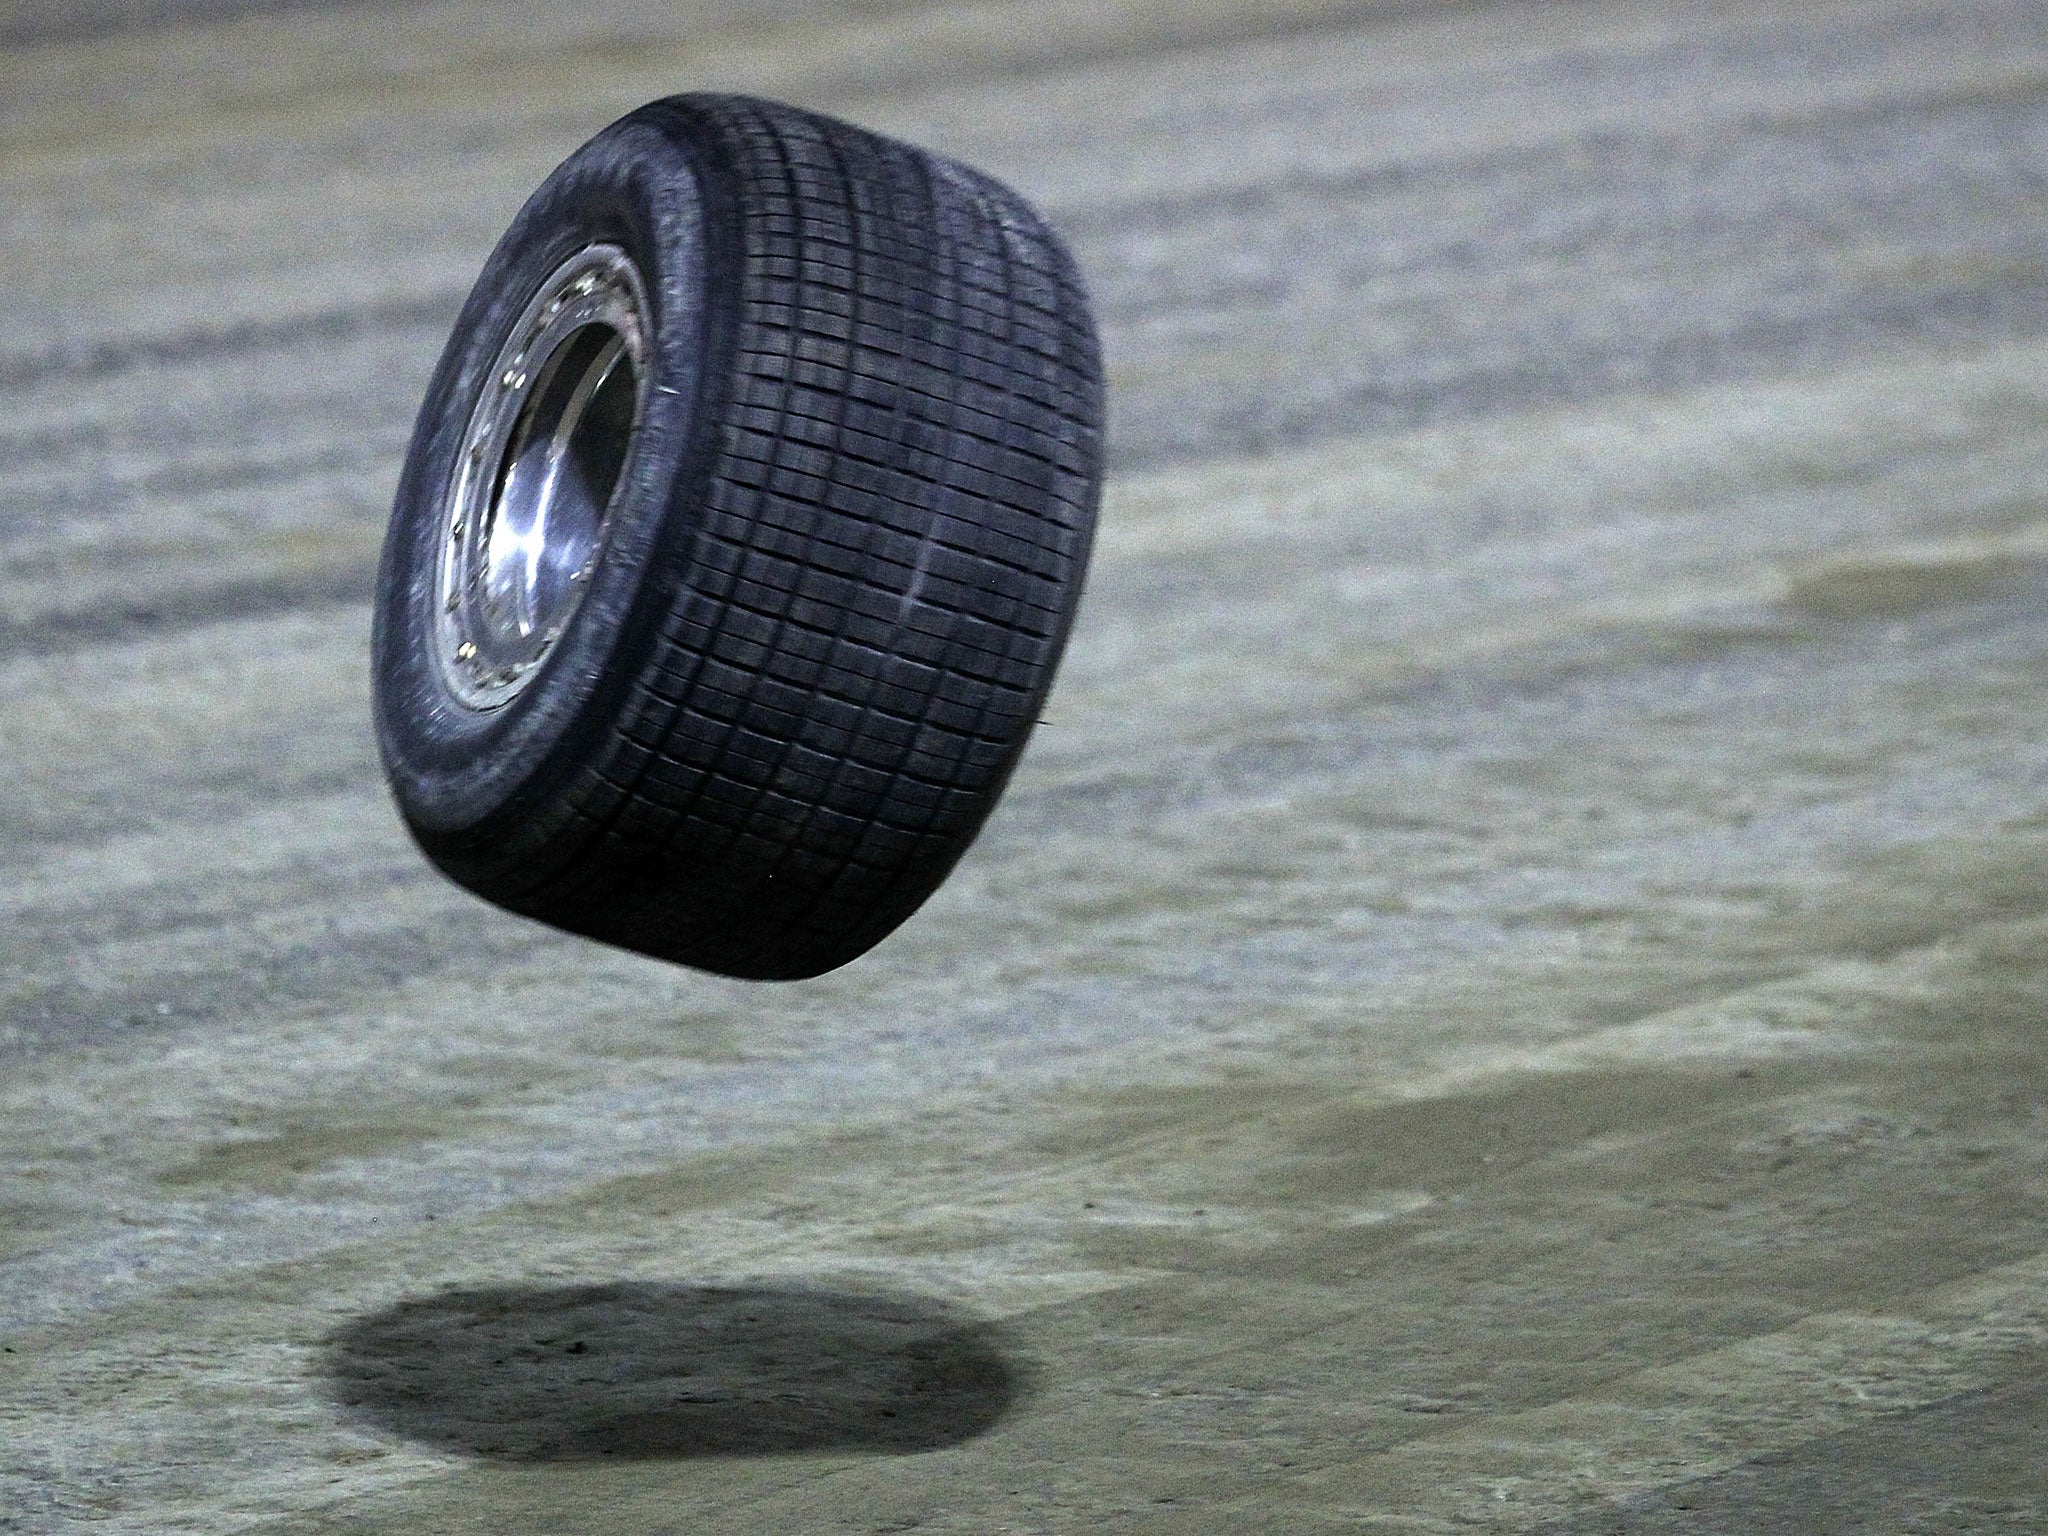 A tire from the car driven by Tony Kanaan (not pictured) bounces on the track during the running of Prelude To The Dream at Eldora Speedway on June 8, 2011 in Rossburg, Ohio.